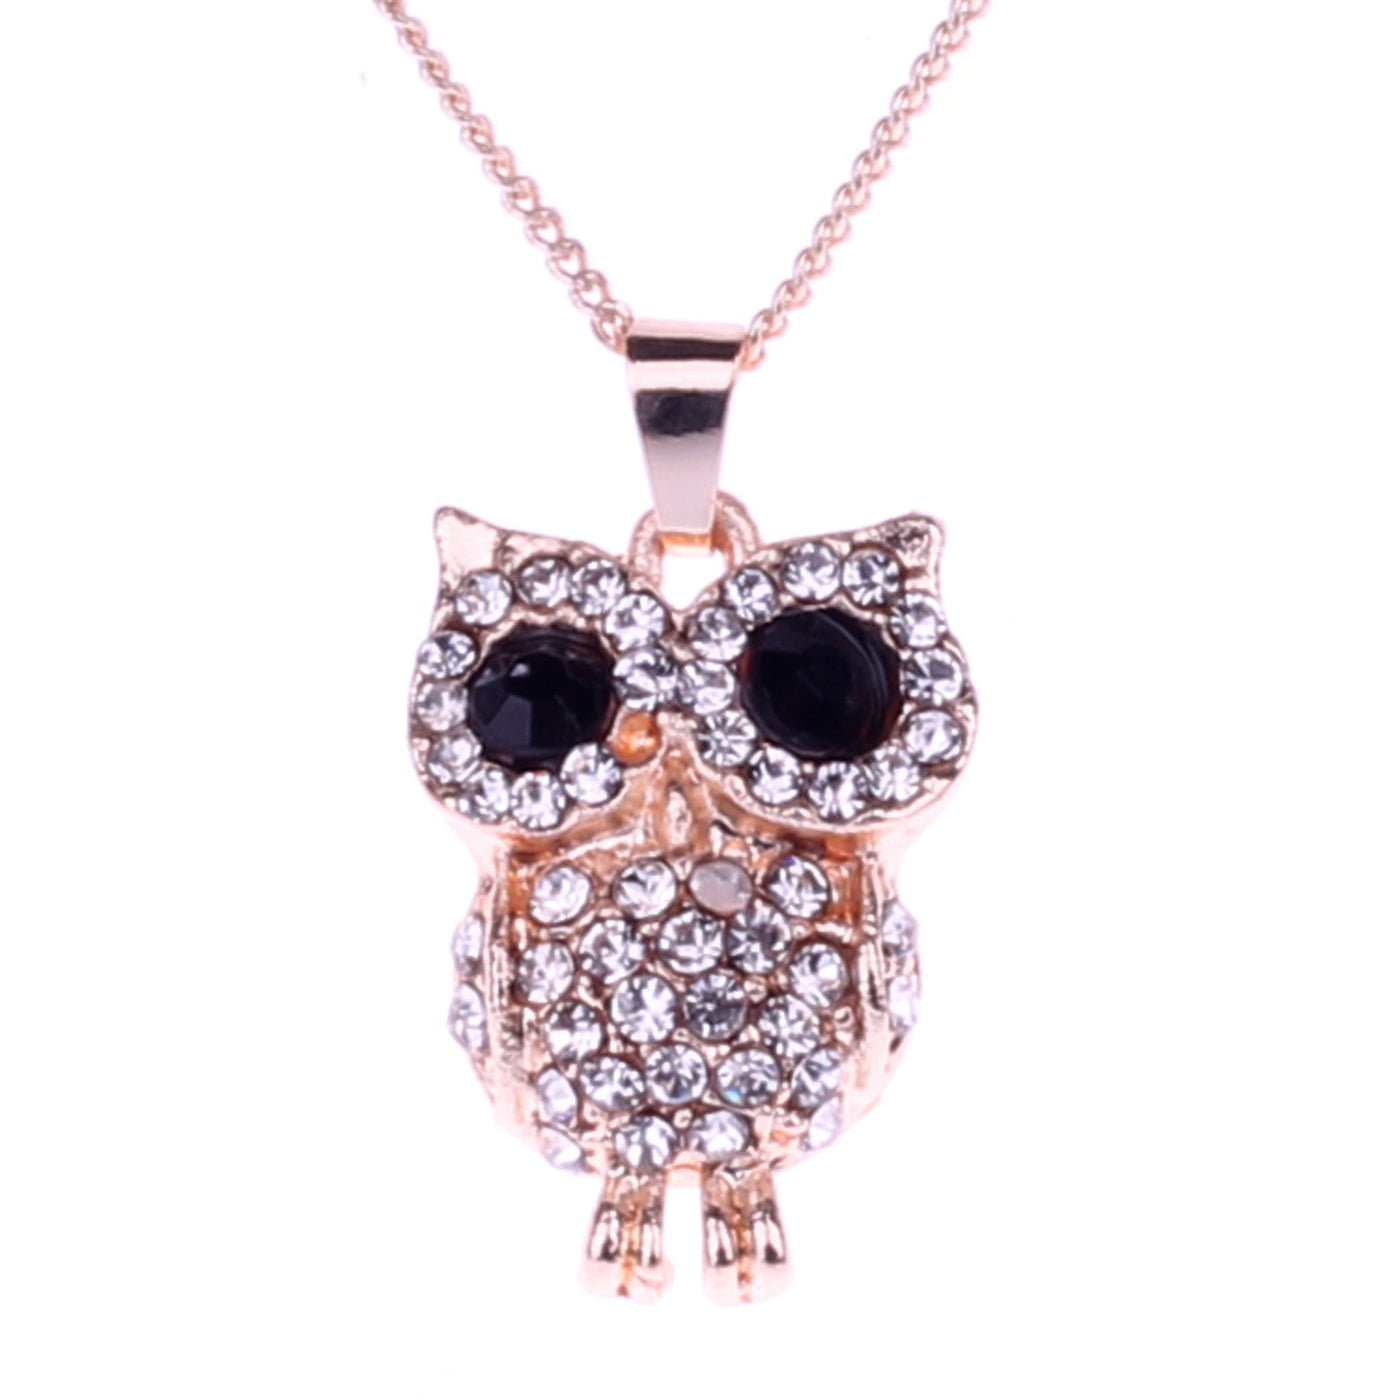 Necklace owl